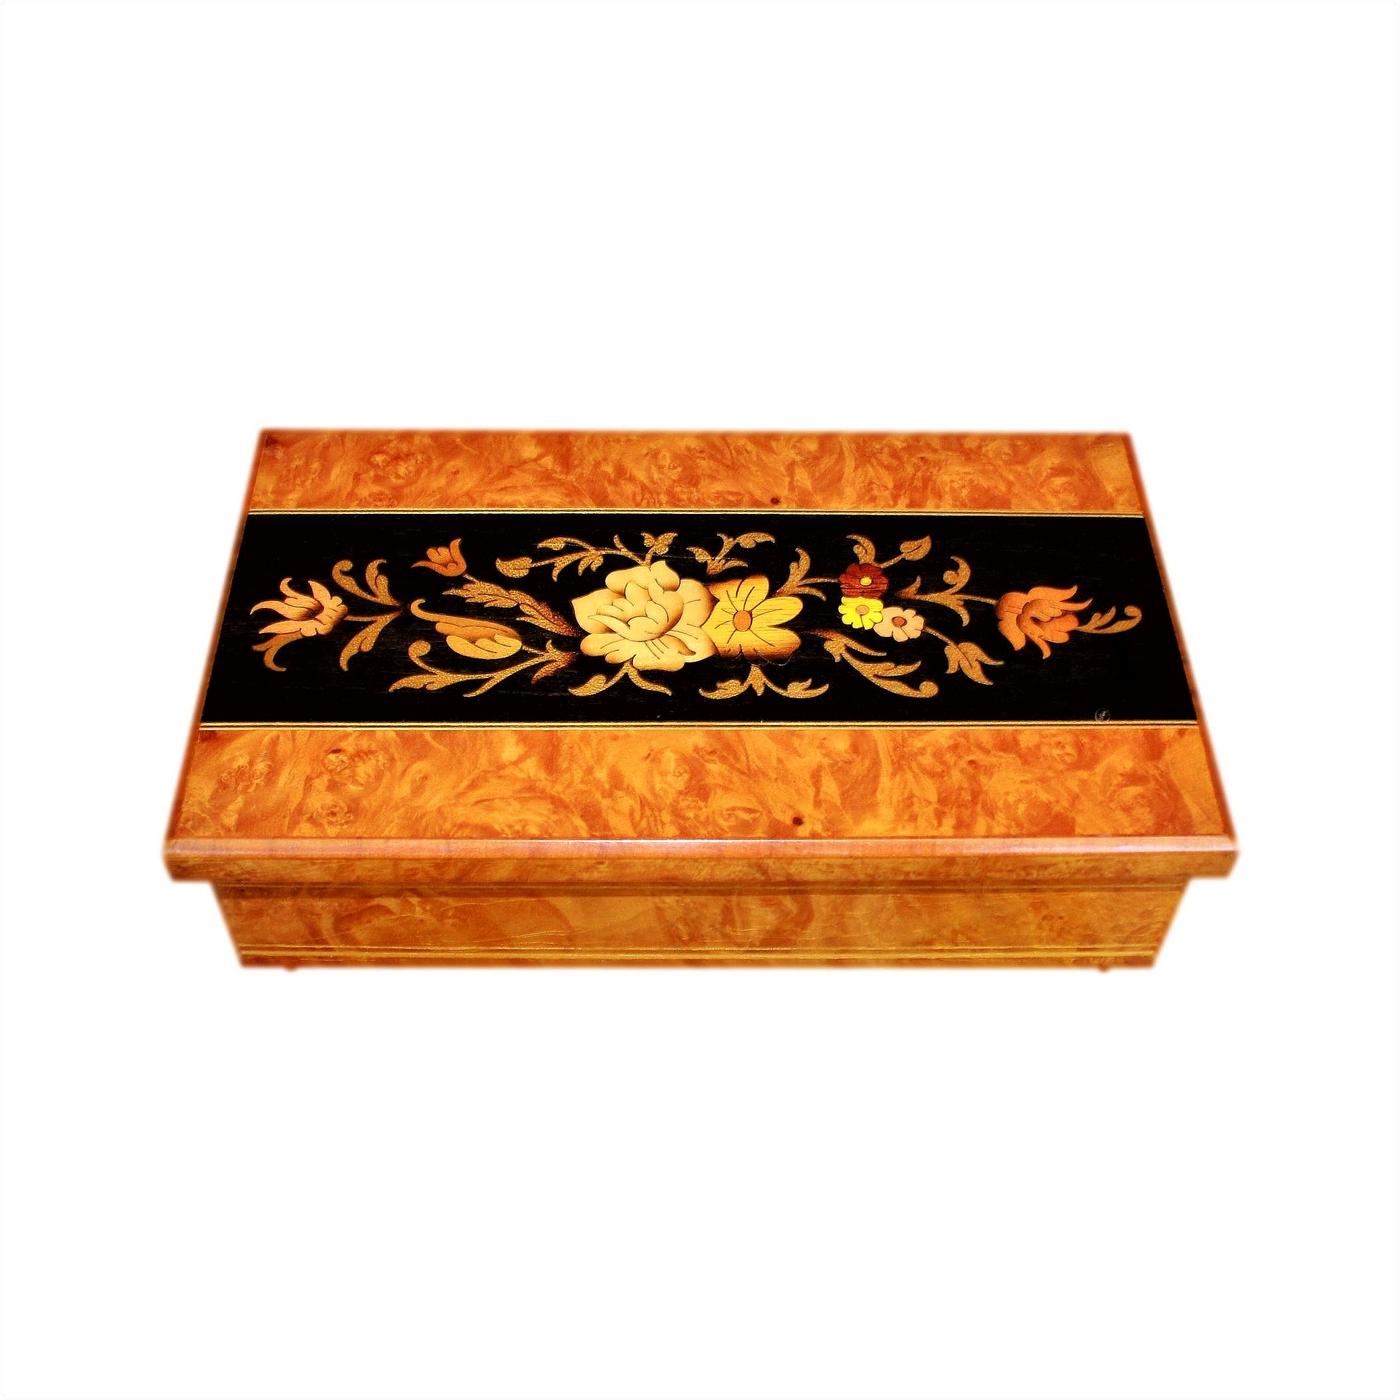 Beautiful Italian Musical Vintage Jewellery Box With Floral Inlay